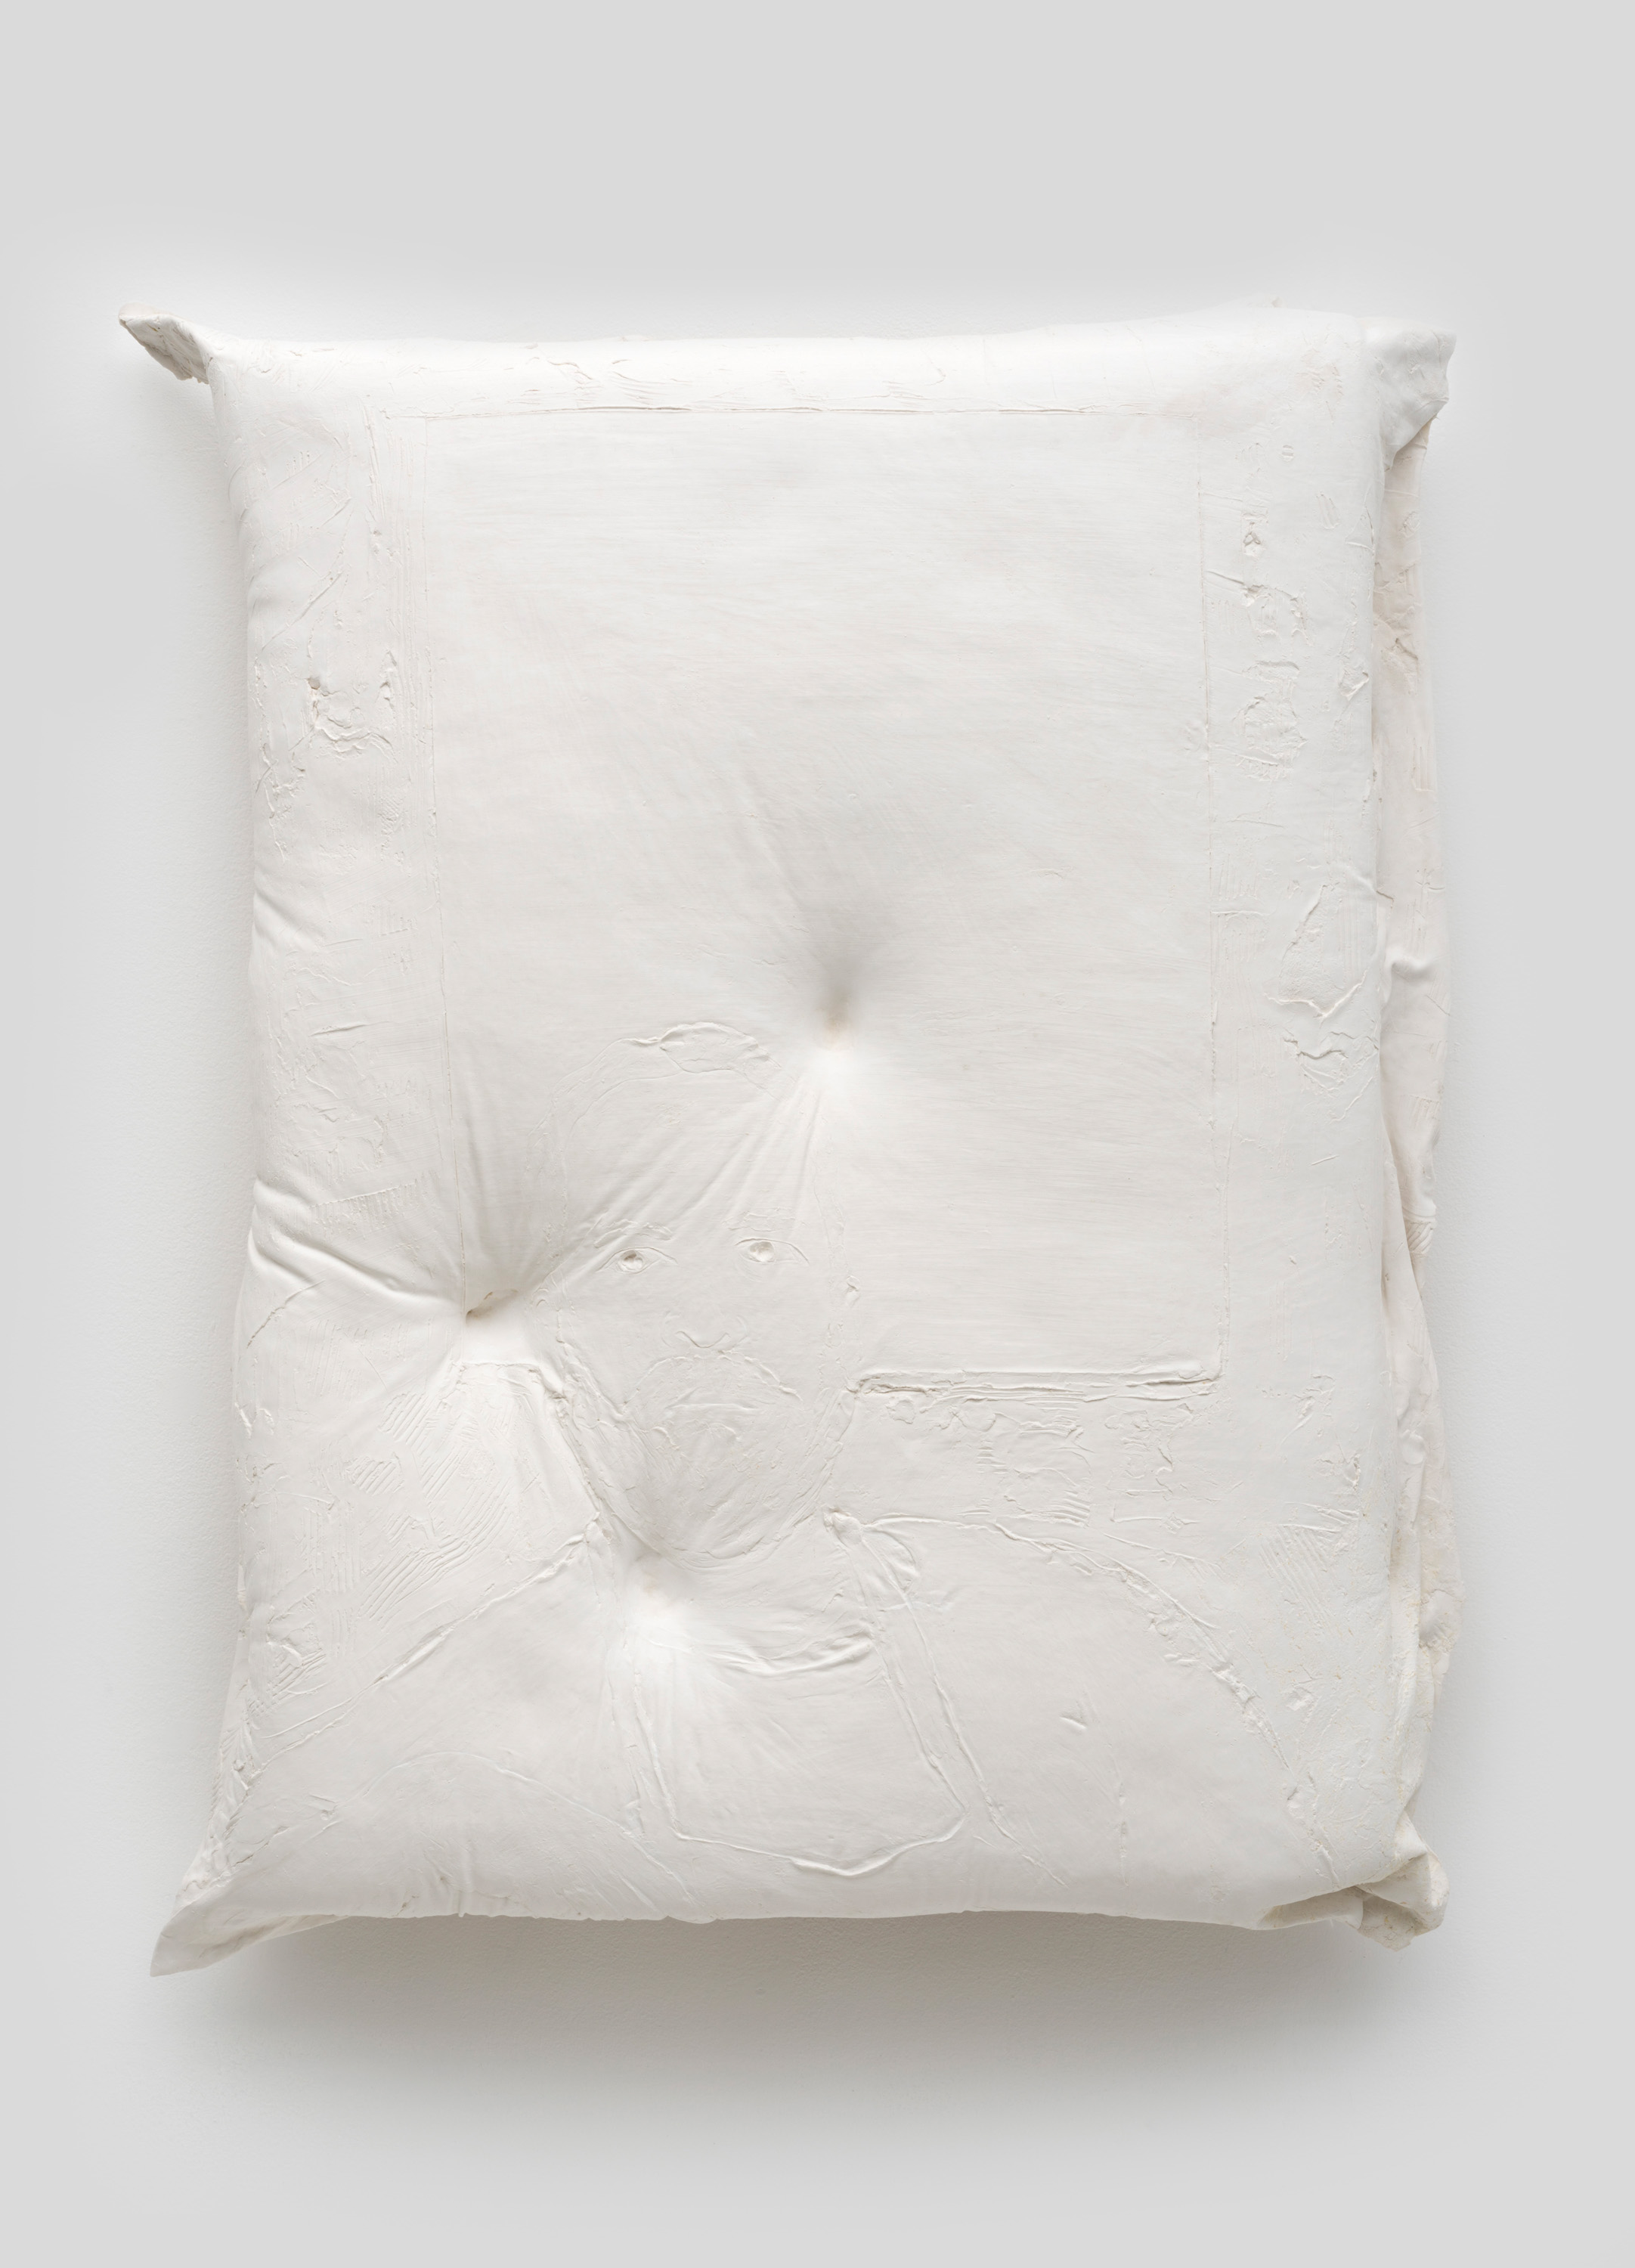   Untitled , 2014 Gypsum cement, fiberglass cloth, and wood 34 x 30 x 8 inches 